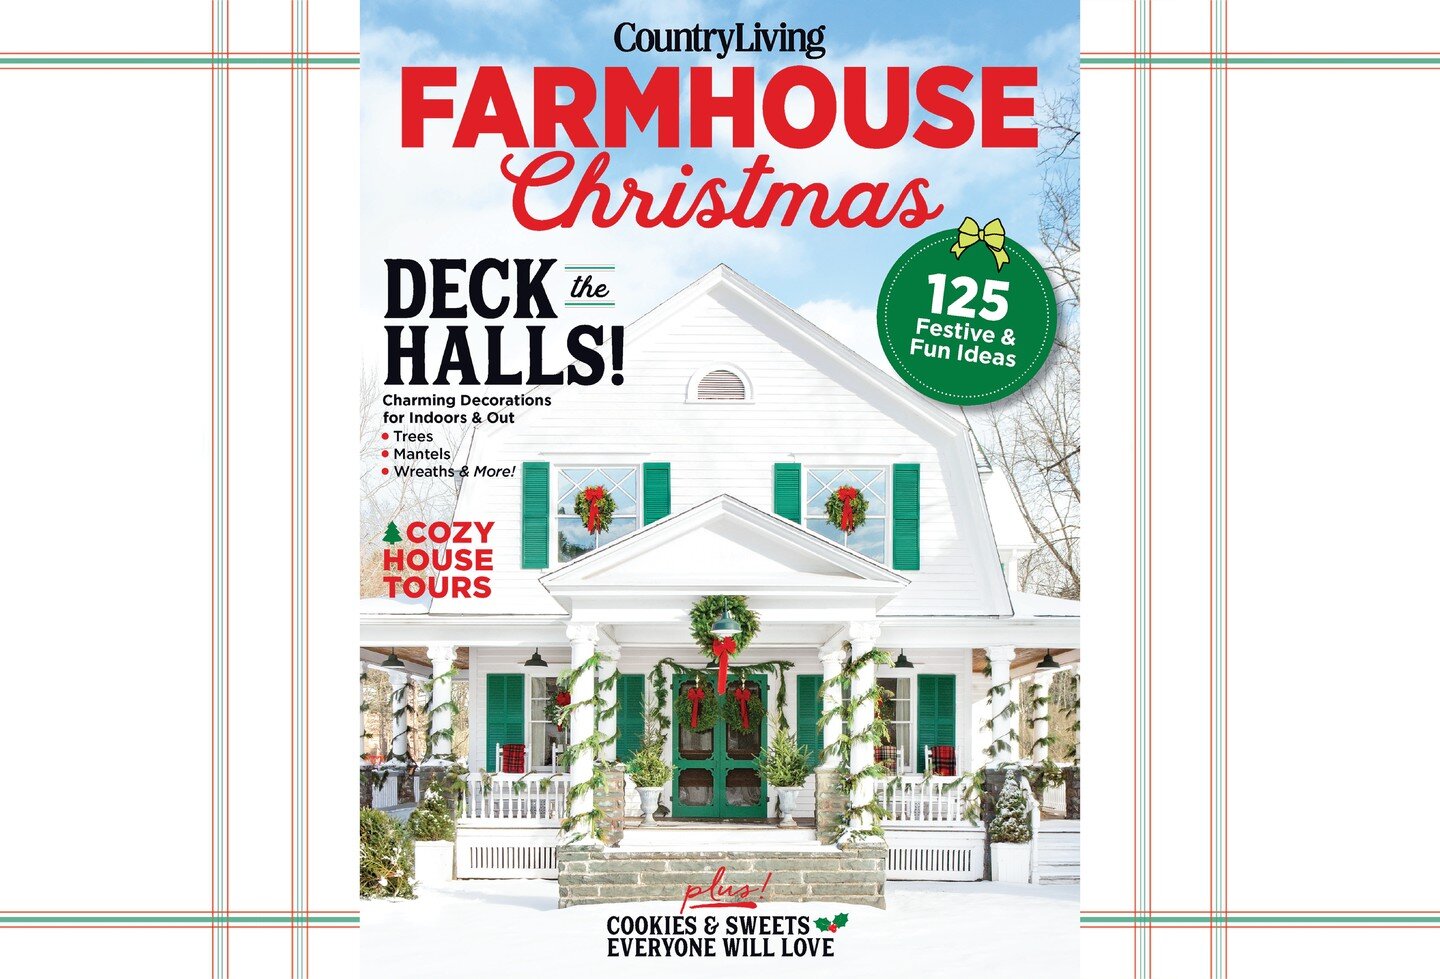 🎄🌟 It's GO time! Need some last-minute inspiration for your holiday decorations or baking? Check out this bookazine I designed for @countrylivingmag . It's full of ideas for merry making. 🍪🥛🎅🏻